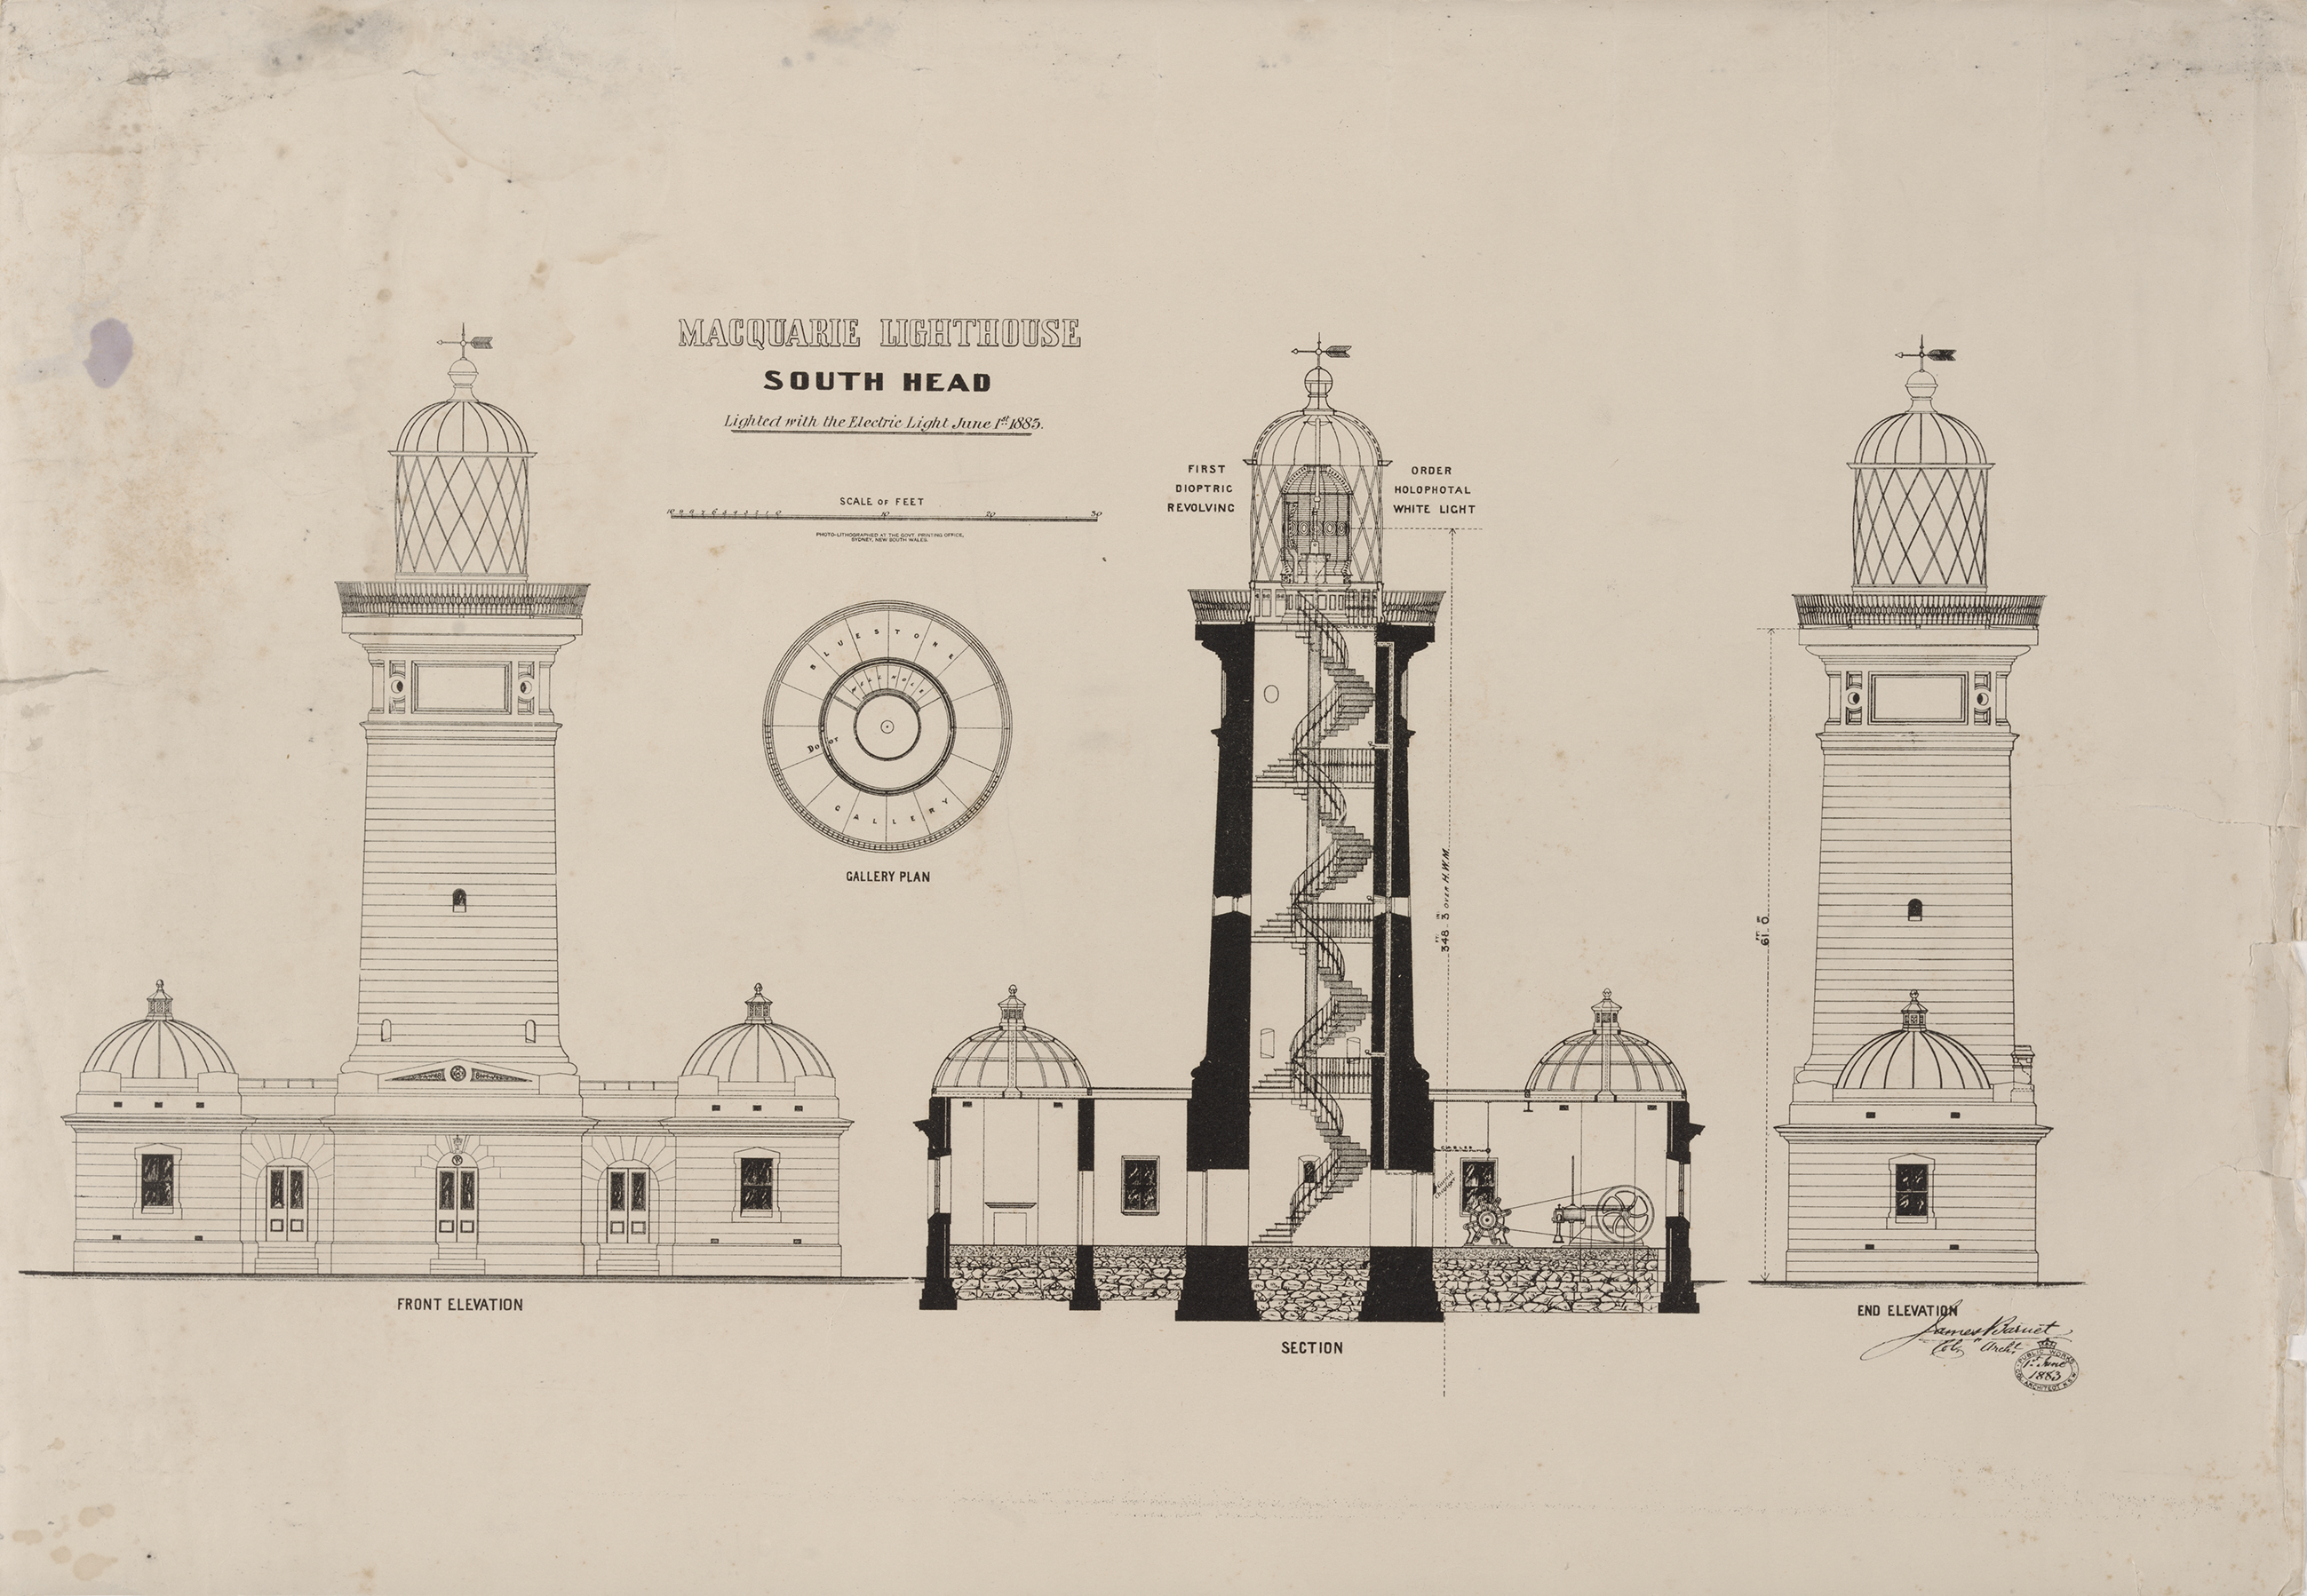 Plan section and elevation of Macquarie Lighthouse South Head, 1885